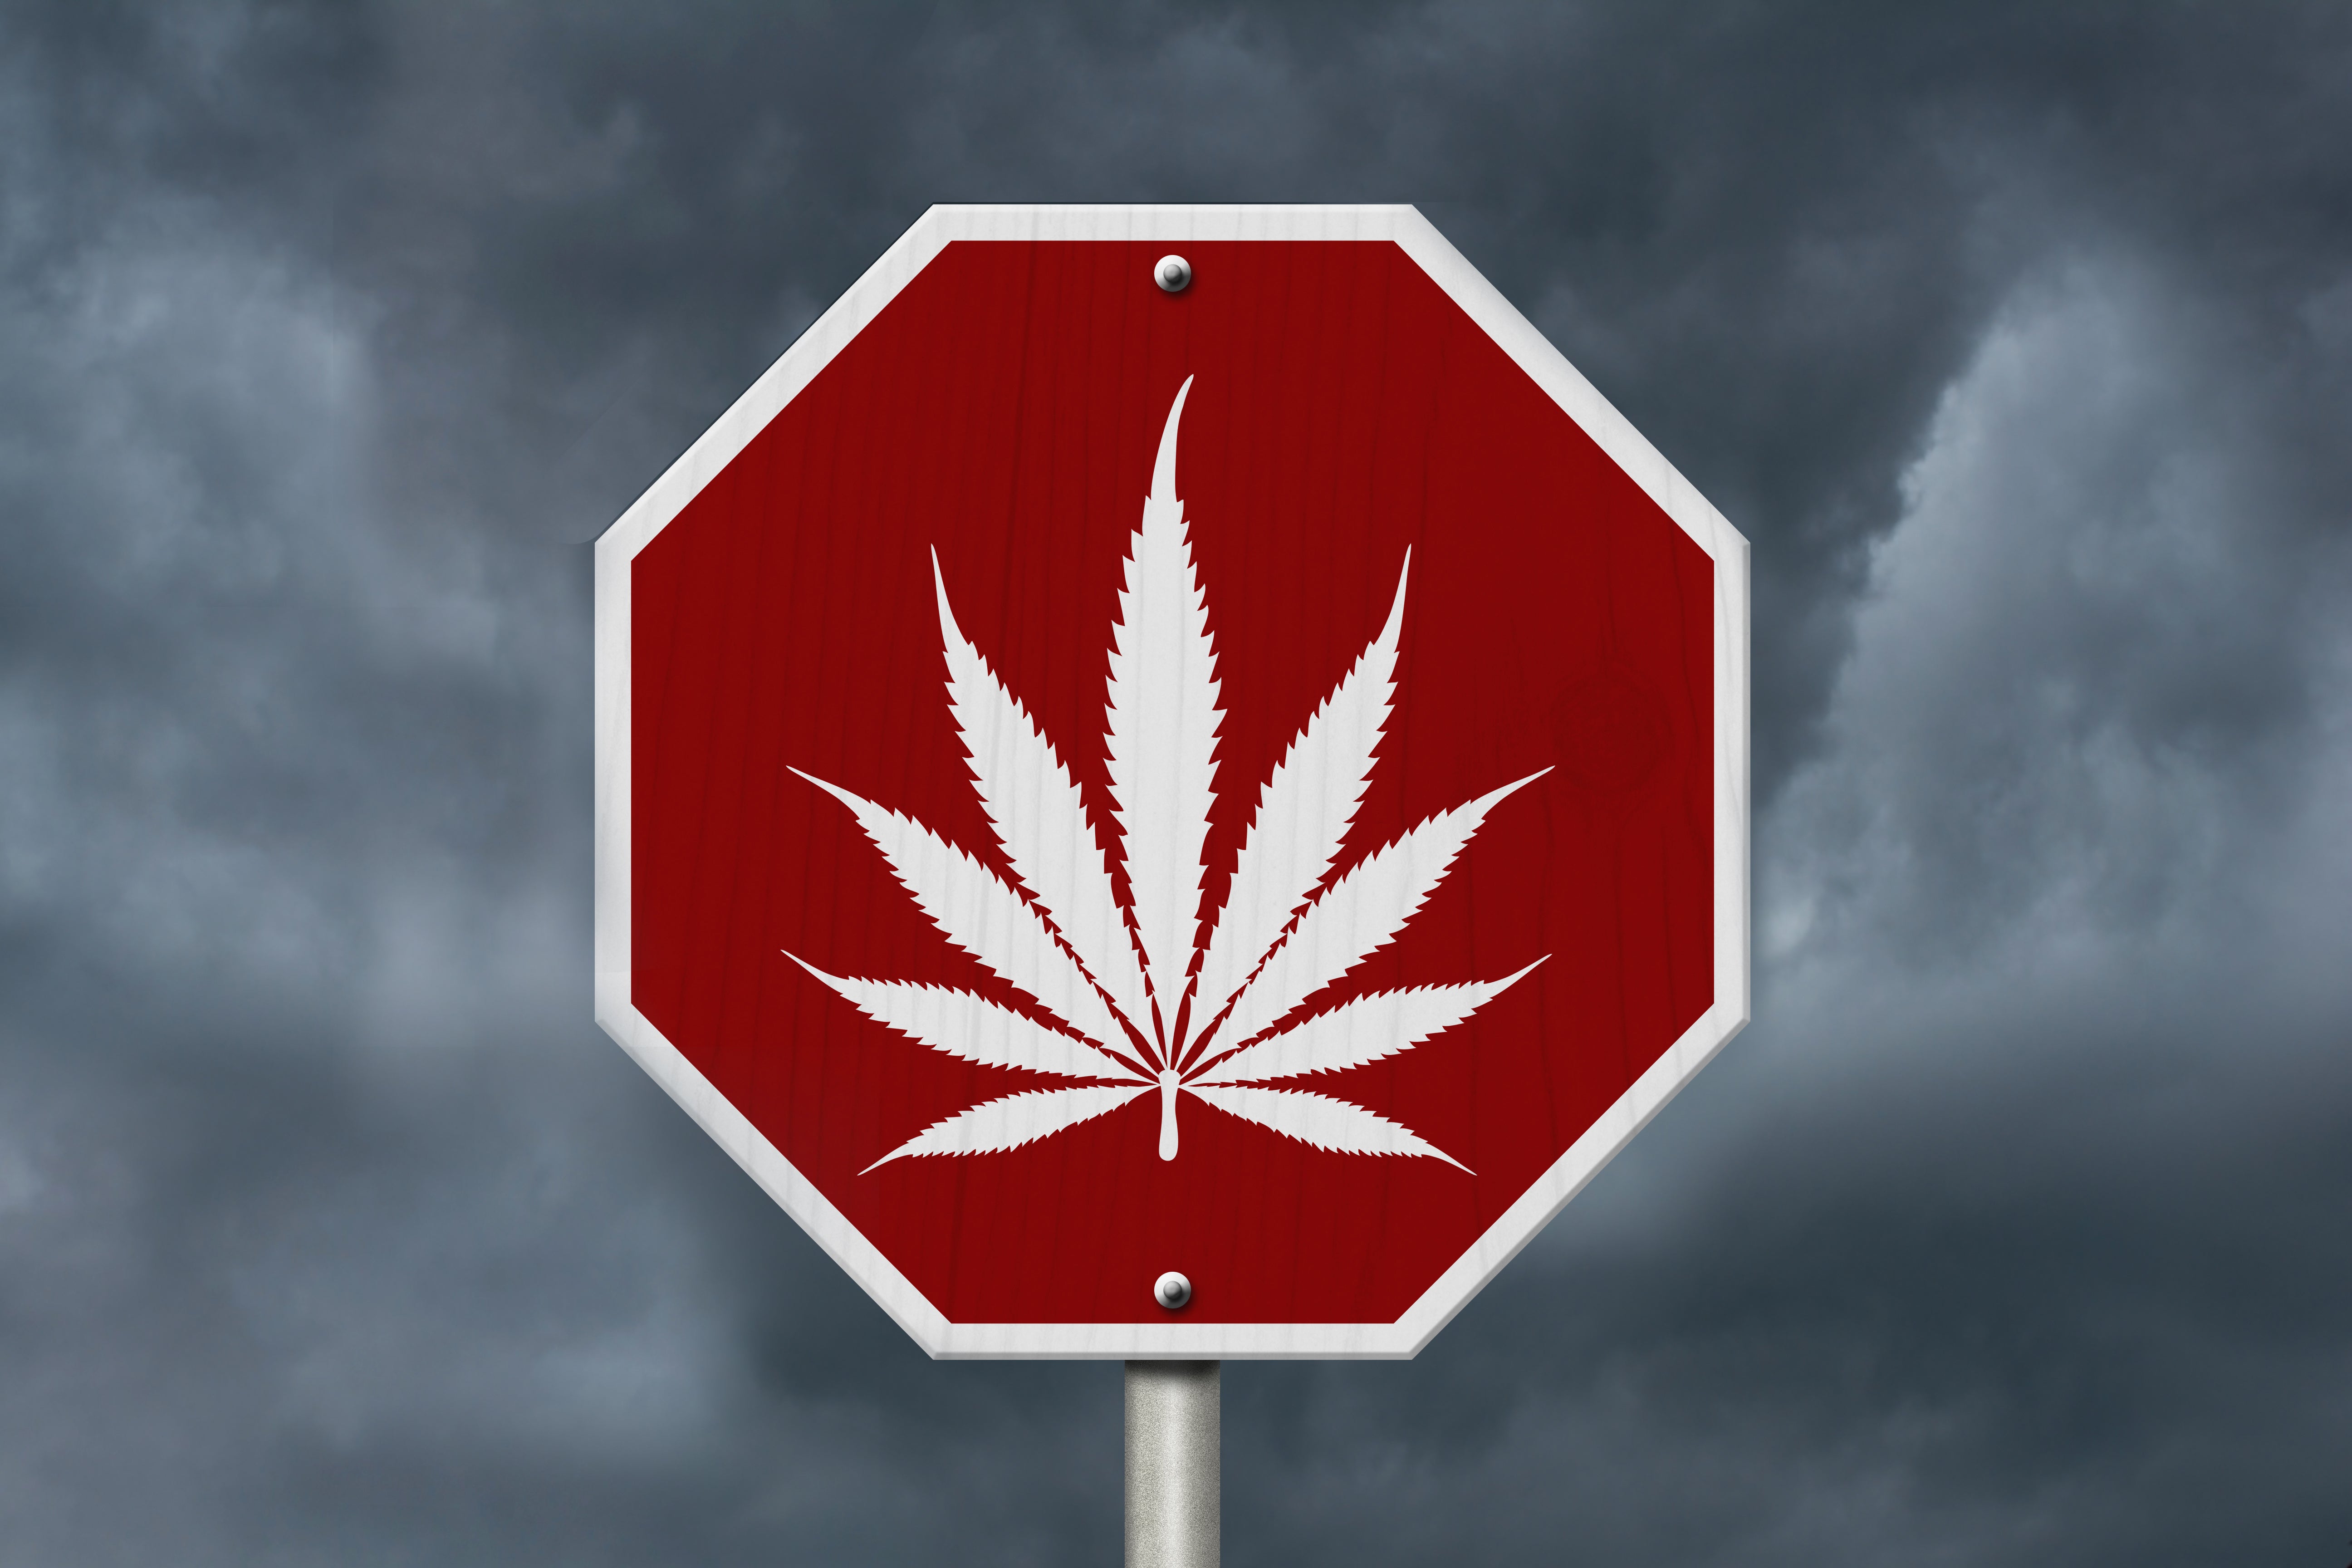 Canadian Study Shows No Increase In Traffic Accidents After Cannabis Legalization